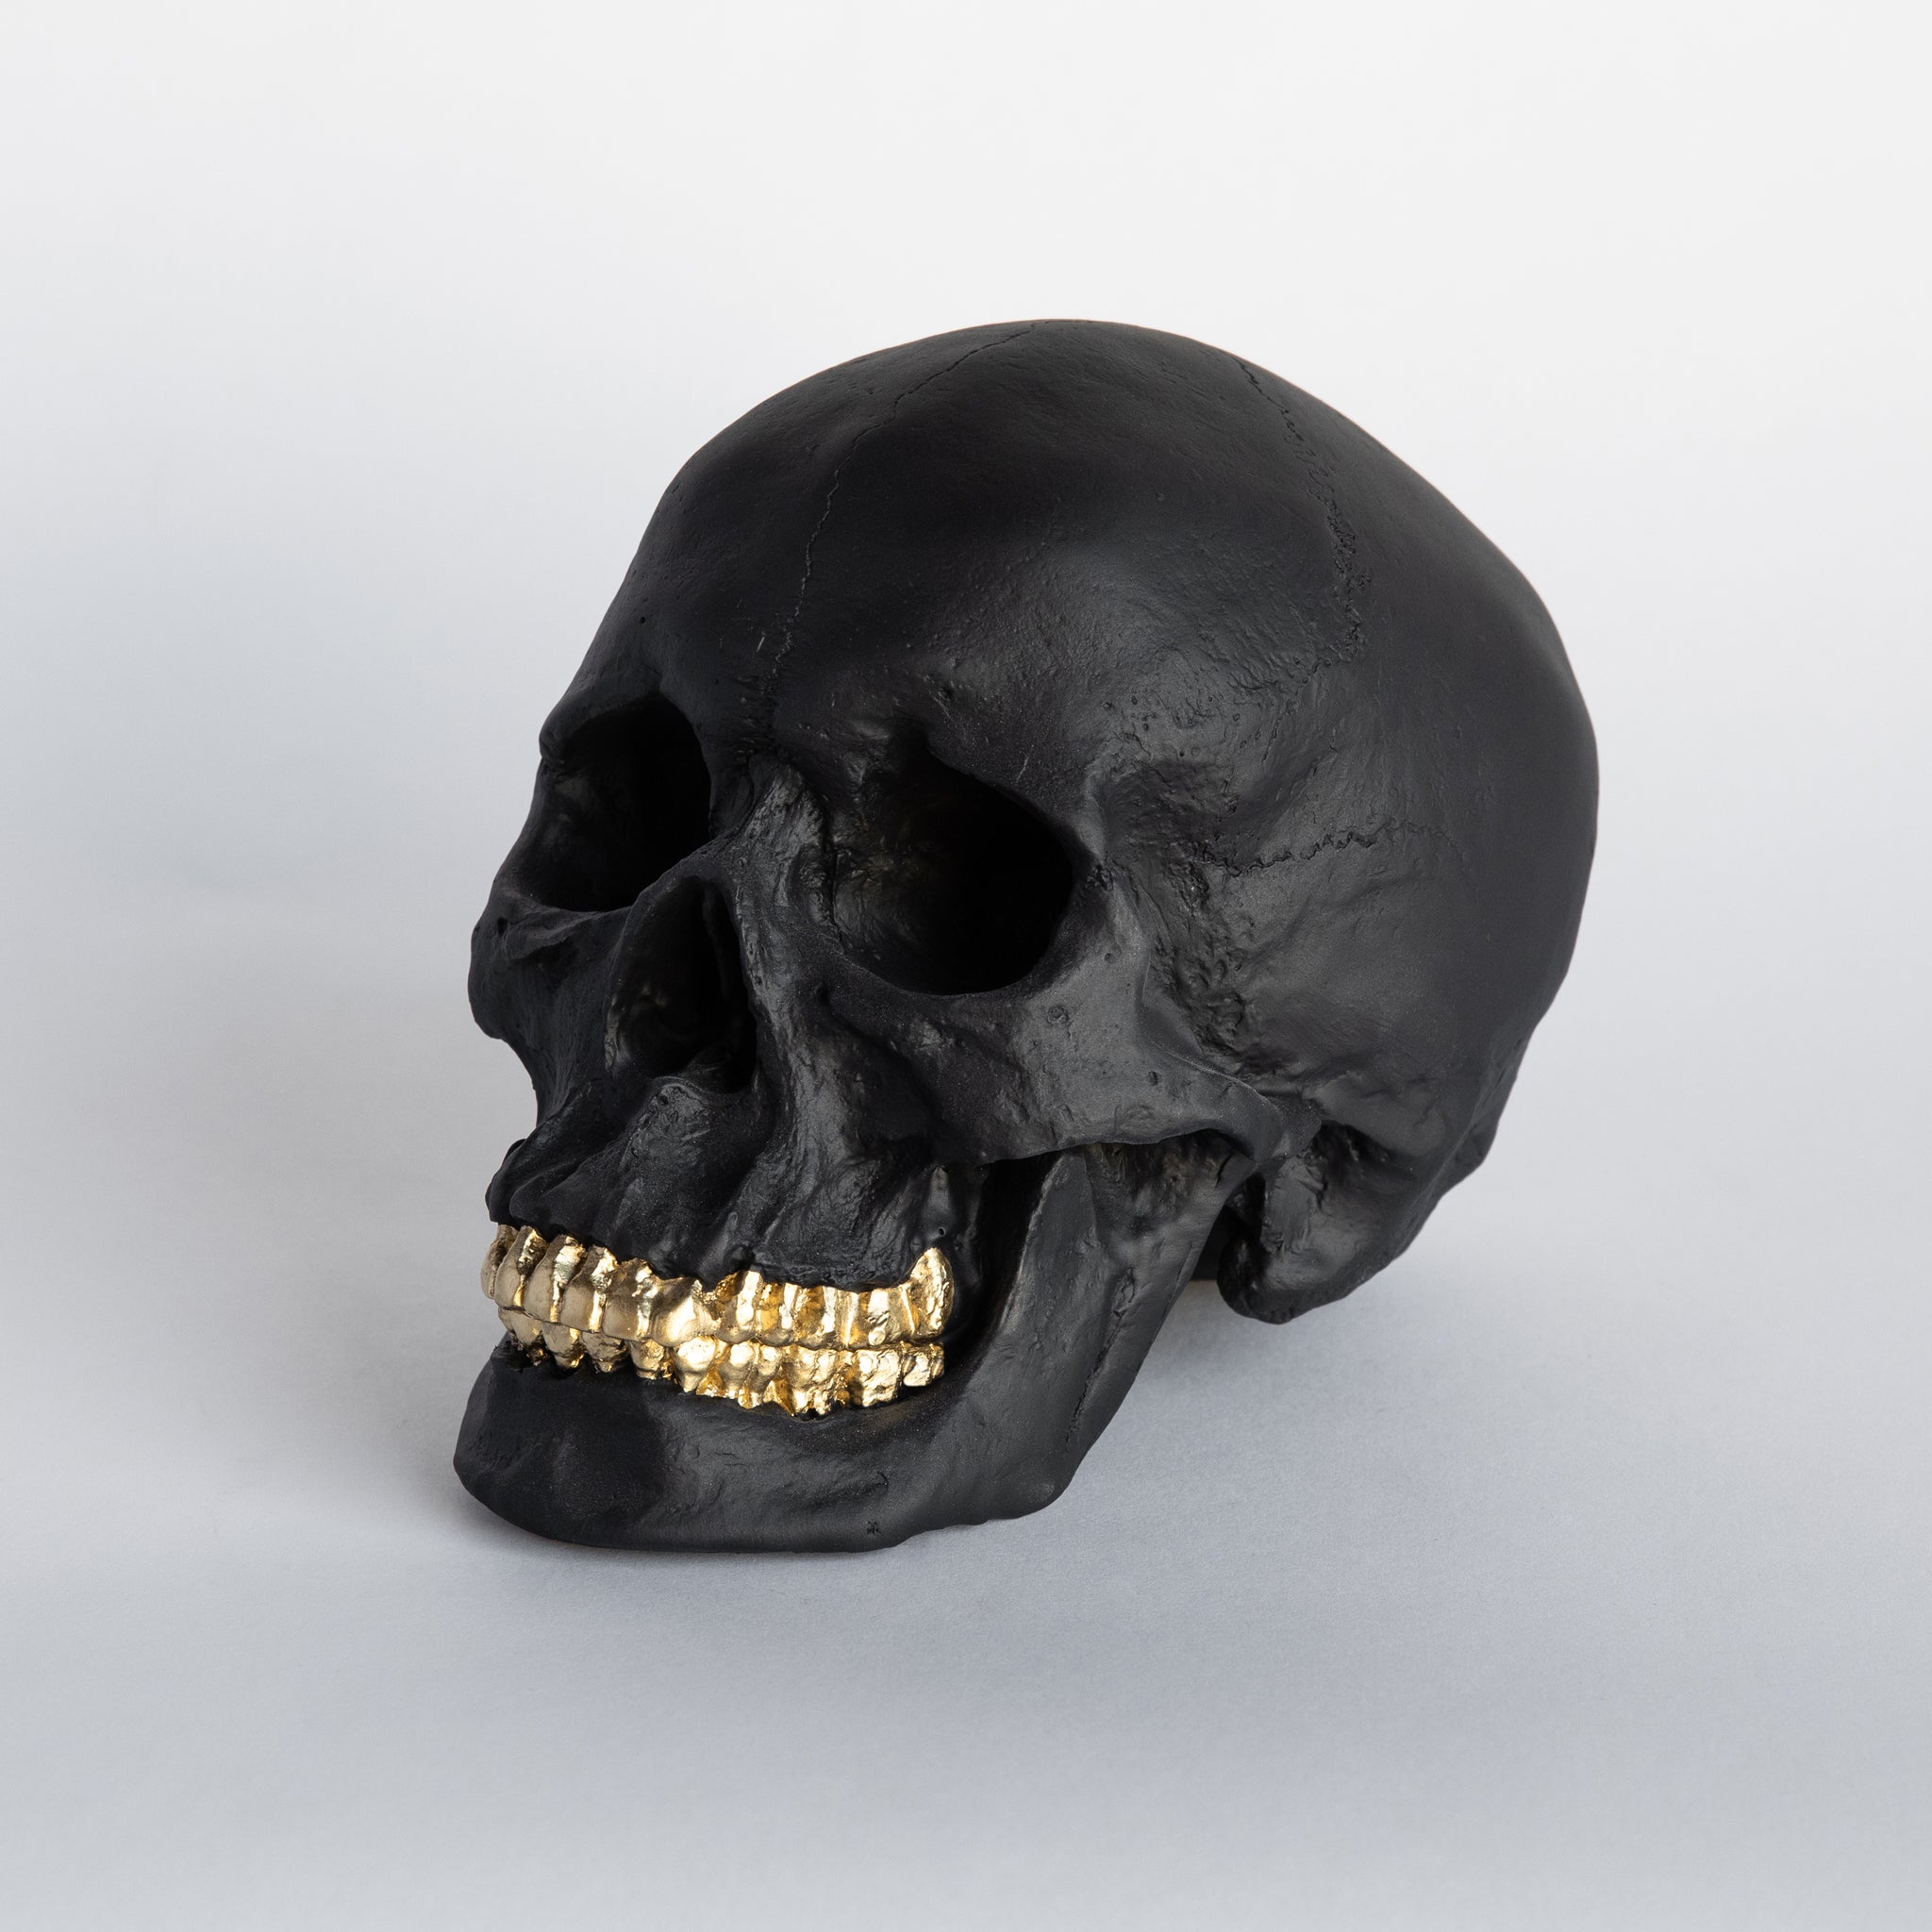 Faux Human Skull Replica // Black with Gold Teeth